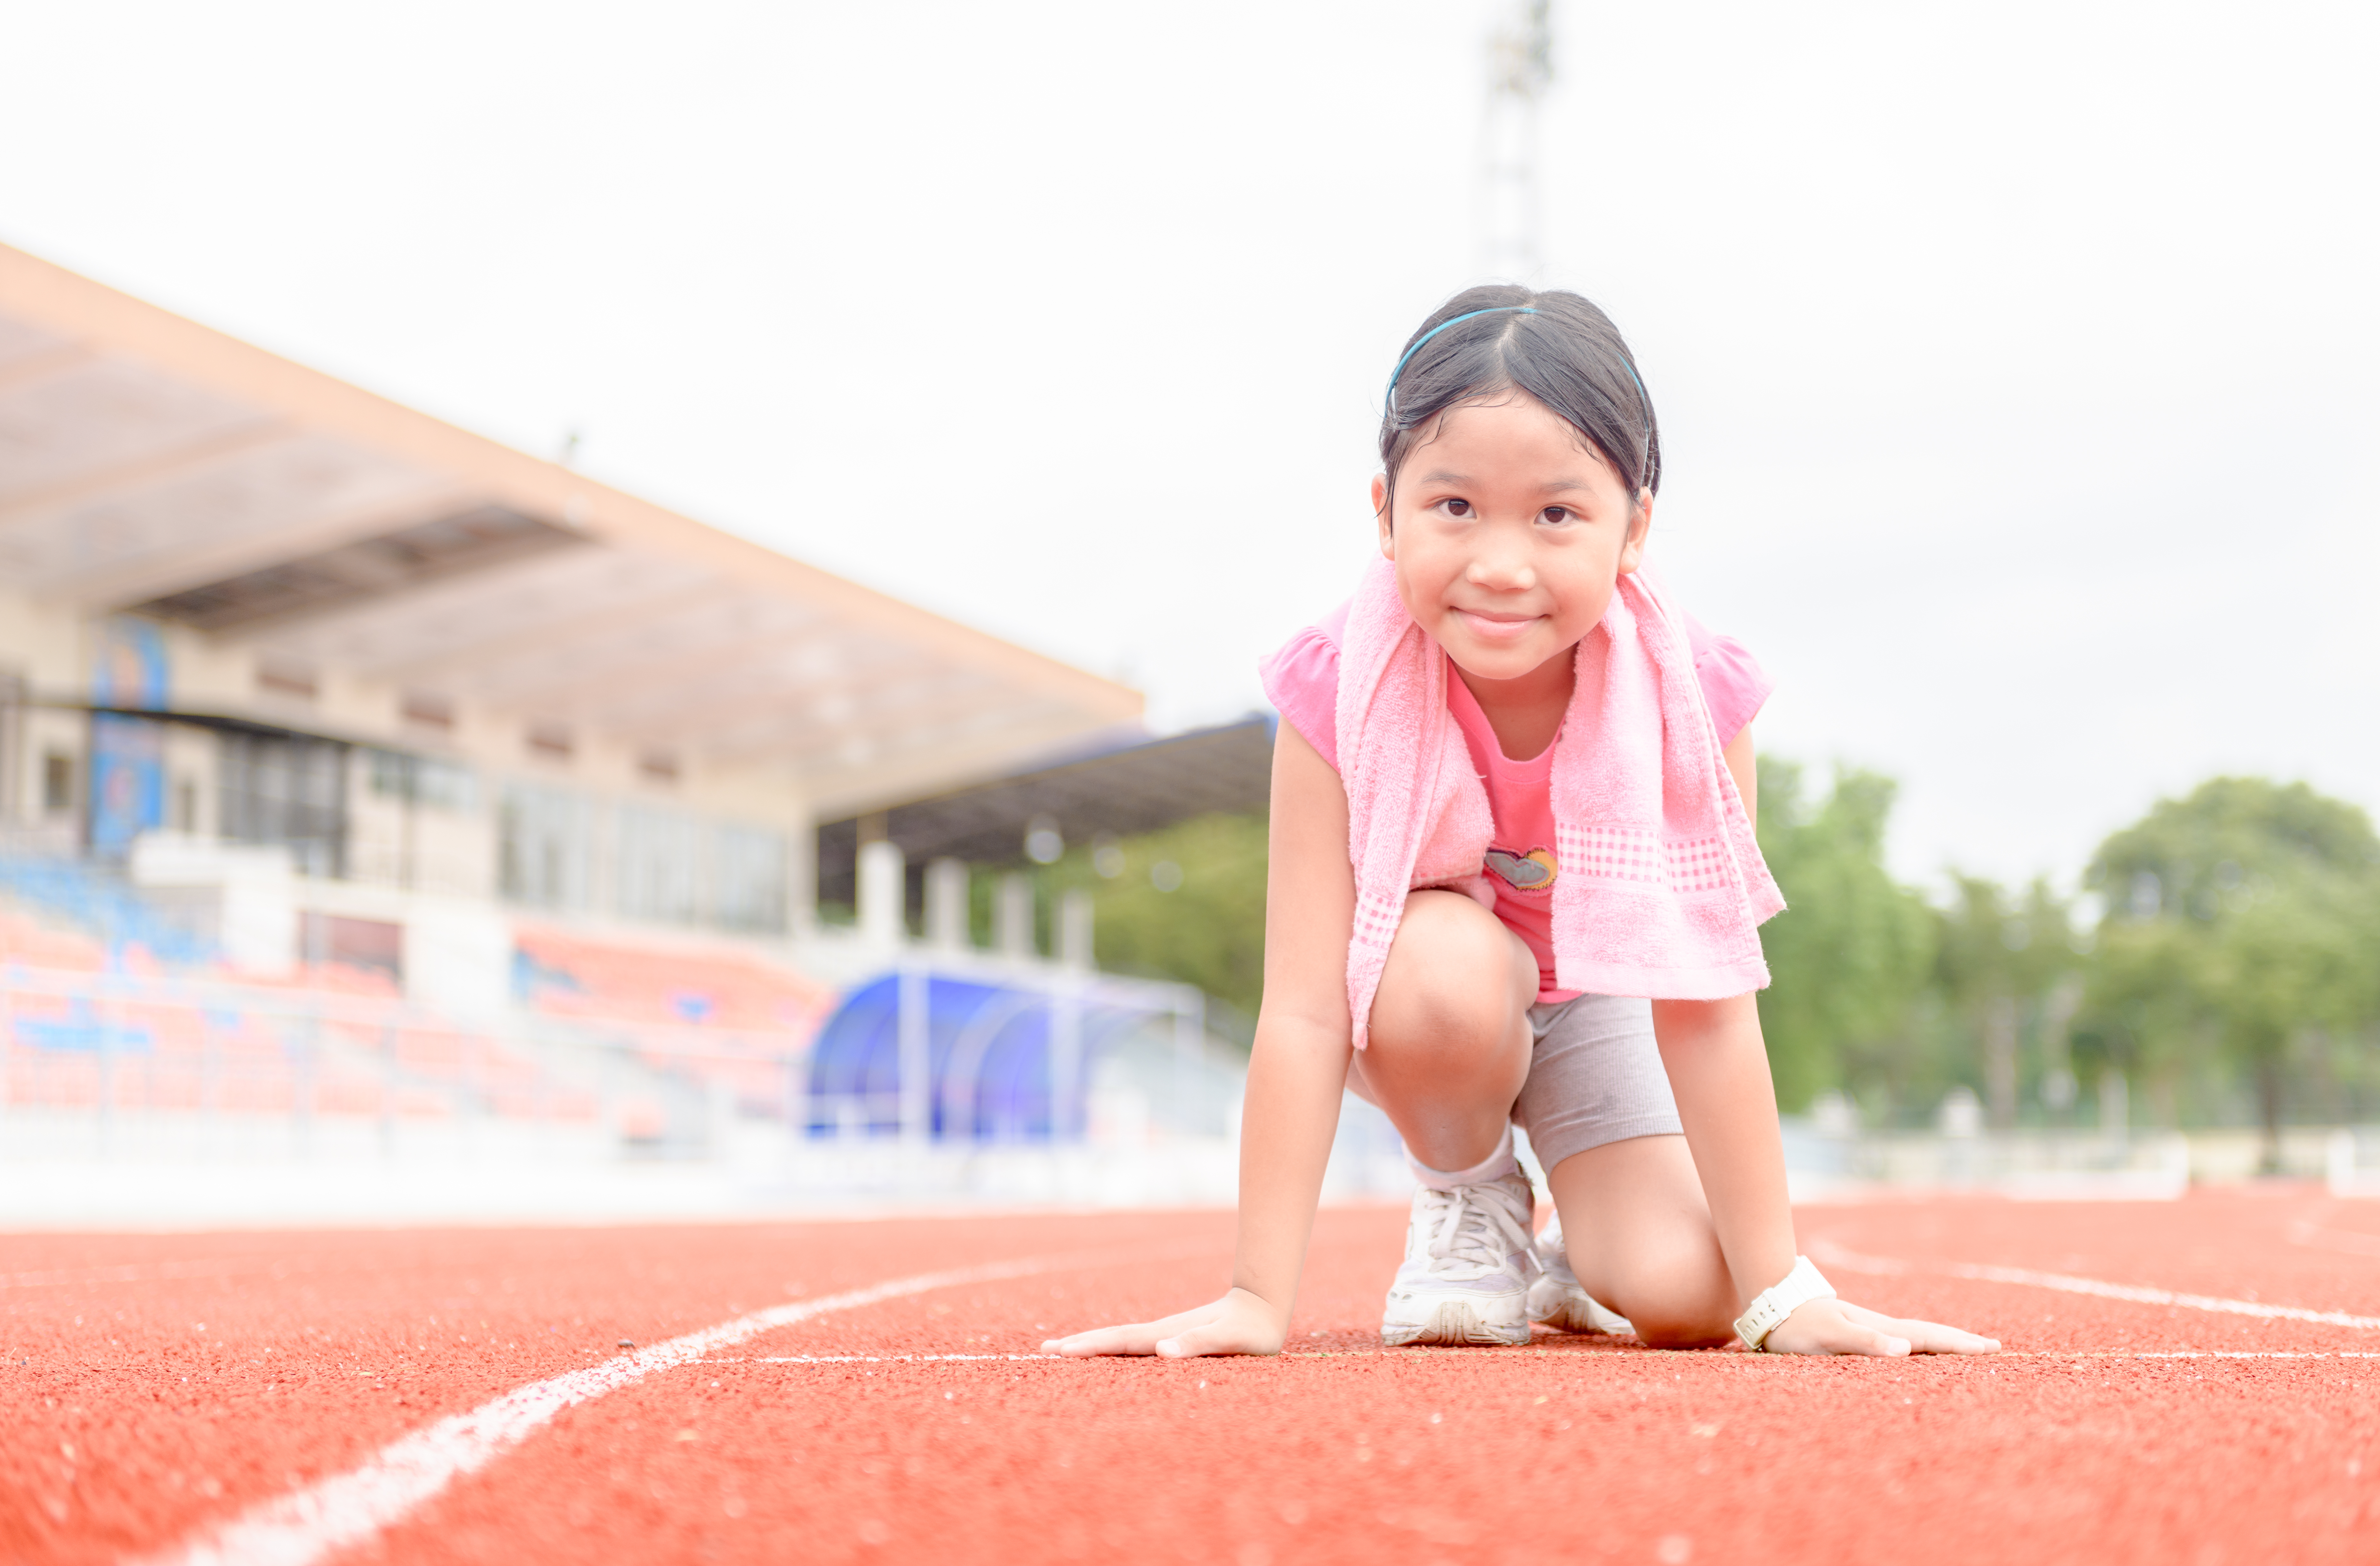 young girl in running position at start line of race